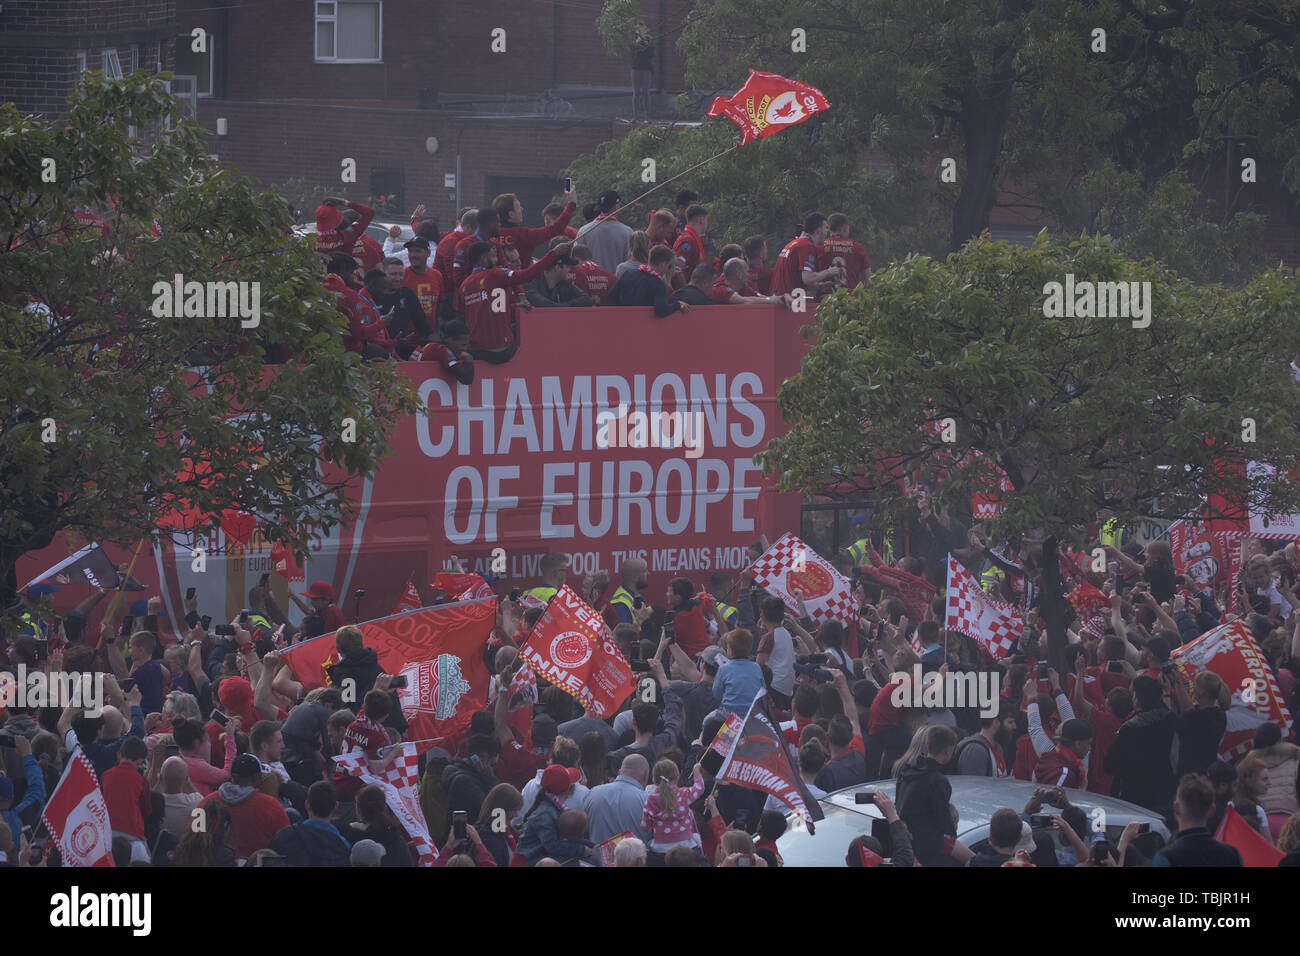 June 2, 2019: Liverpool, UK. Following their Champions League success last night, Liverpool Football Club parade the Champions League trophy on an open top bus through the Old Swan area of Liverpool. Credit: Christopher Middleton/Alamy Live News Stock Photo